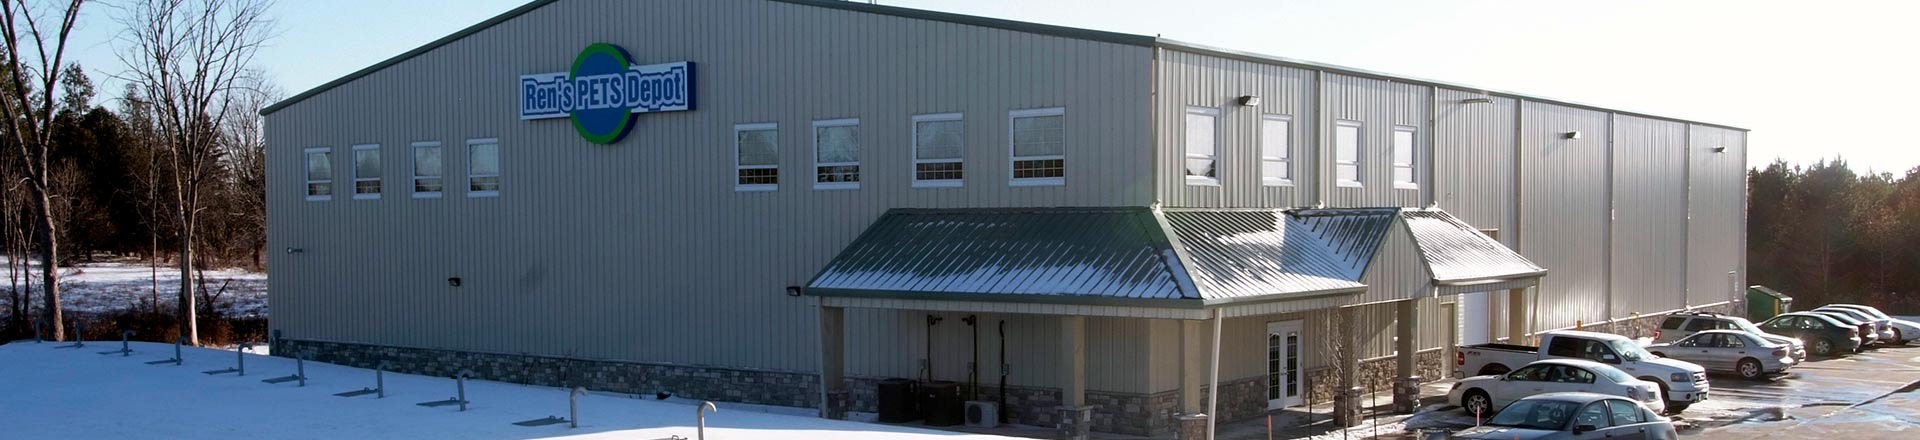 21,055 Sqft metal building for commercial use